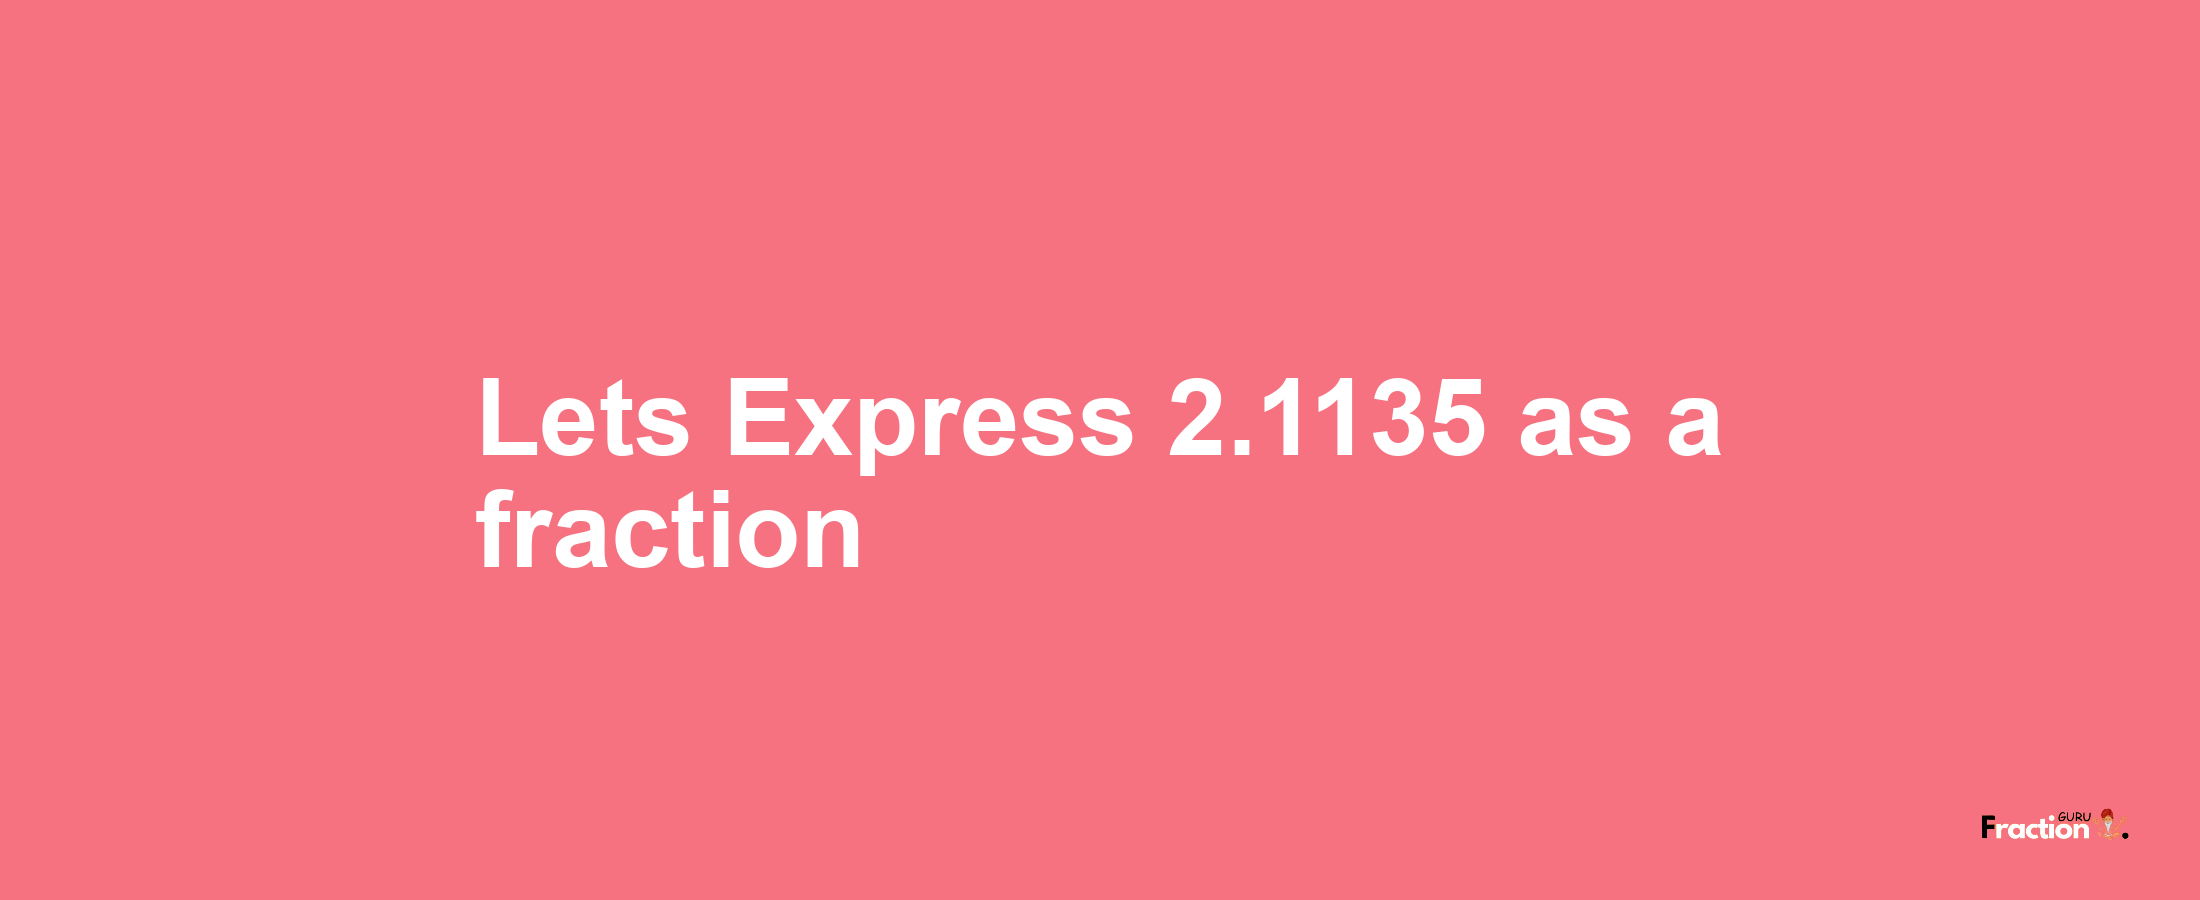 Lets Express 2.1135 as afraction